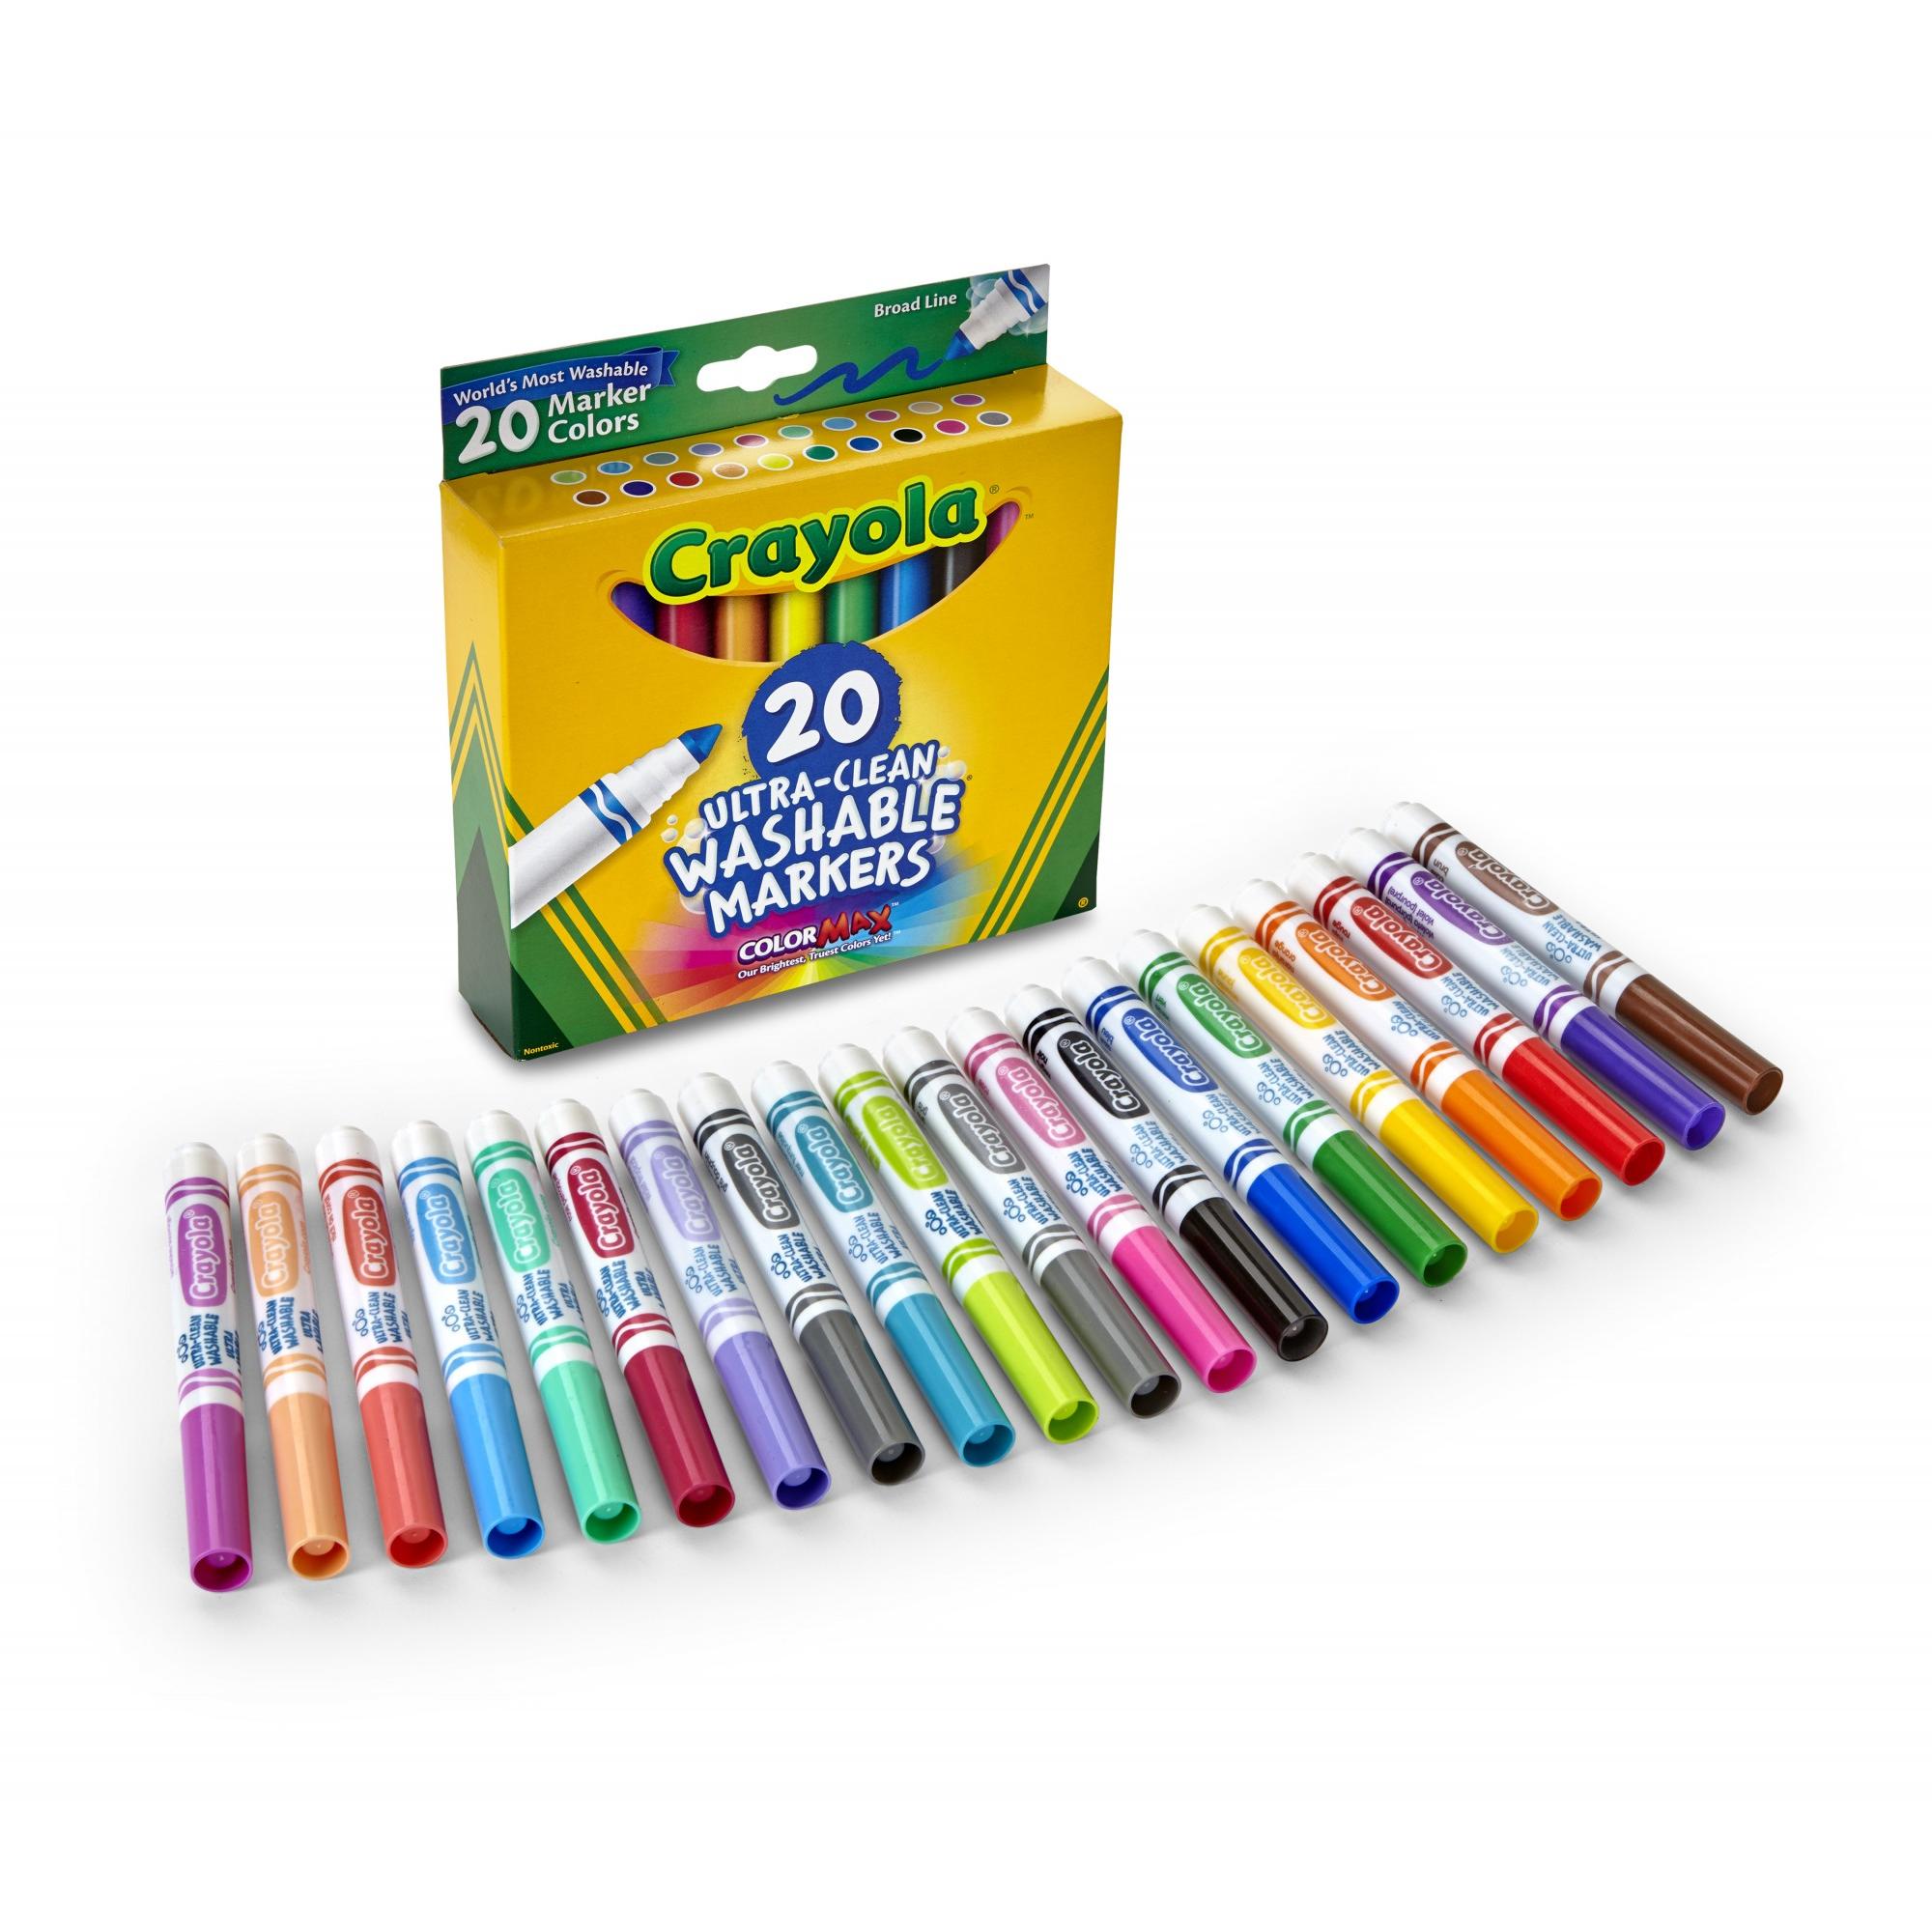 Crayola Ultra-Clean Washable Broad Line Markers, Back to School Supplies, 20 Ct, Classic Colors - image 3 of 8